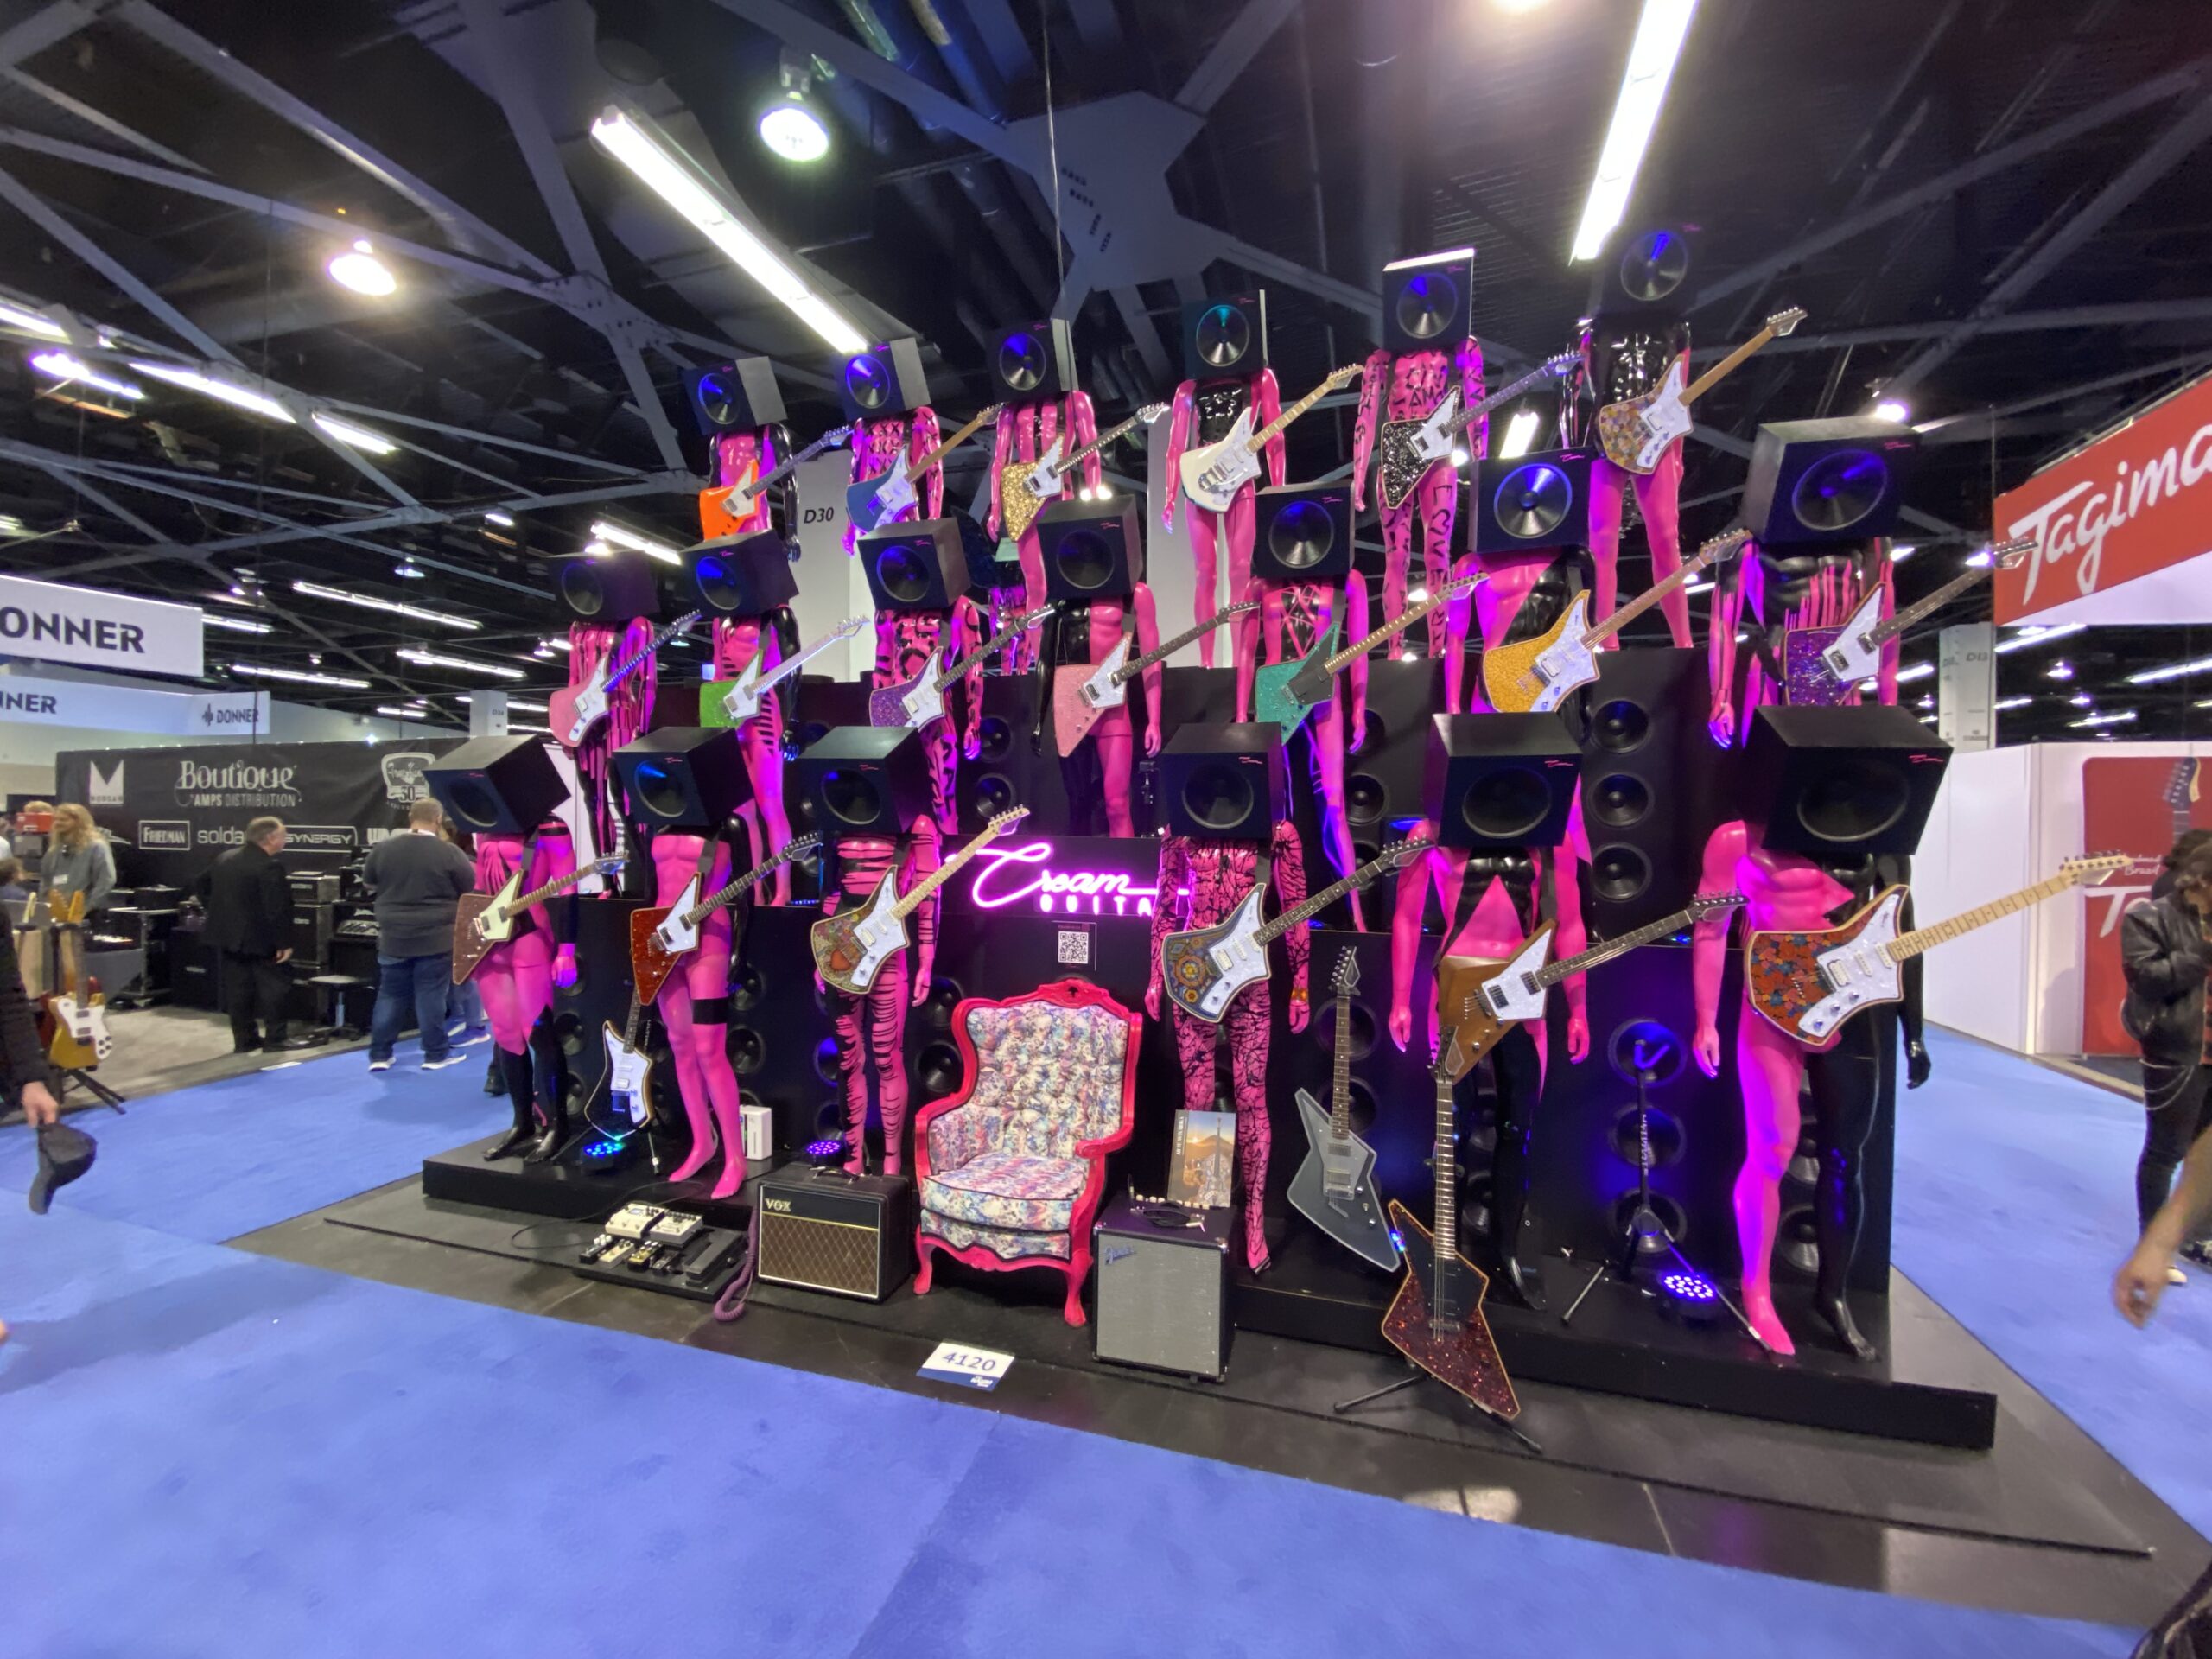 If we had to guess, we’d say Cream Guitars’ booth draws inspiration from Barbie, Game of Thrones, The Residents and Deal or No Deal—but we could be wrong on that.